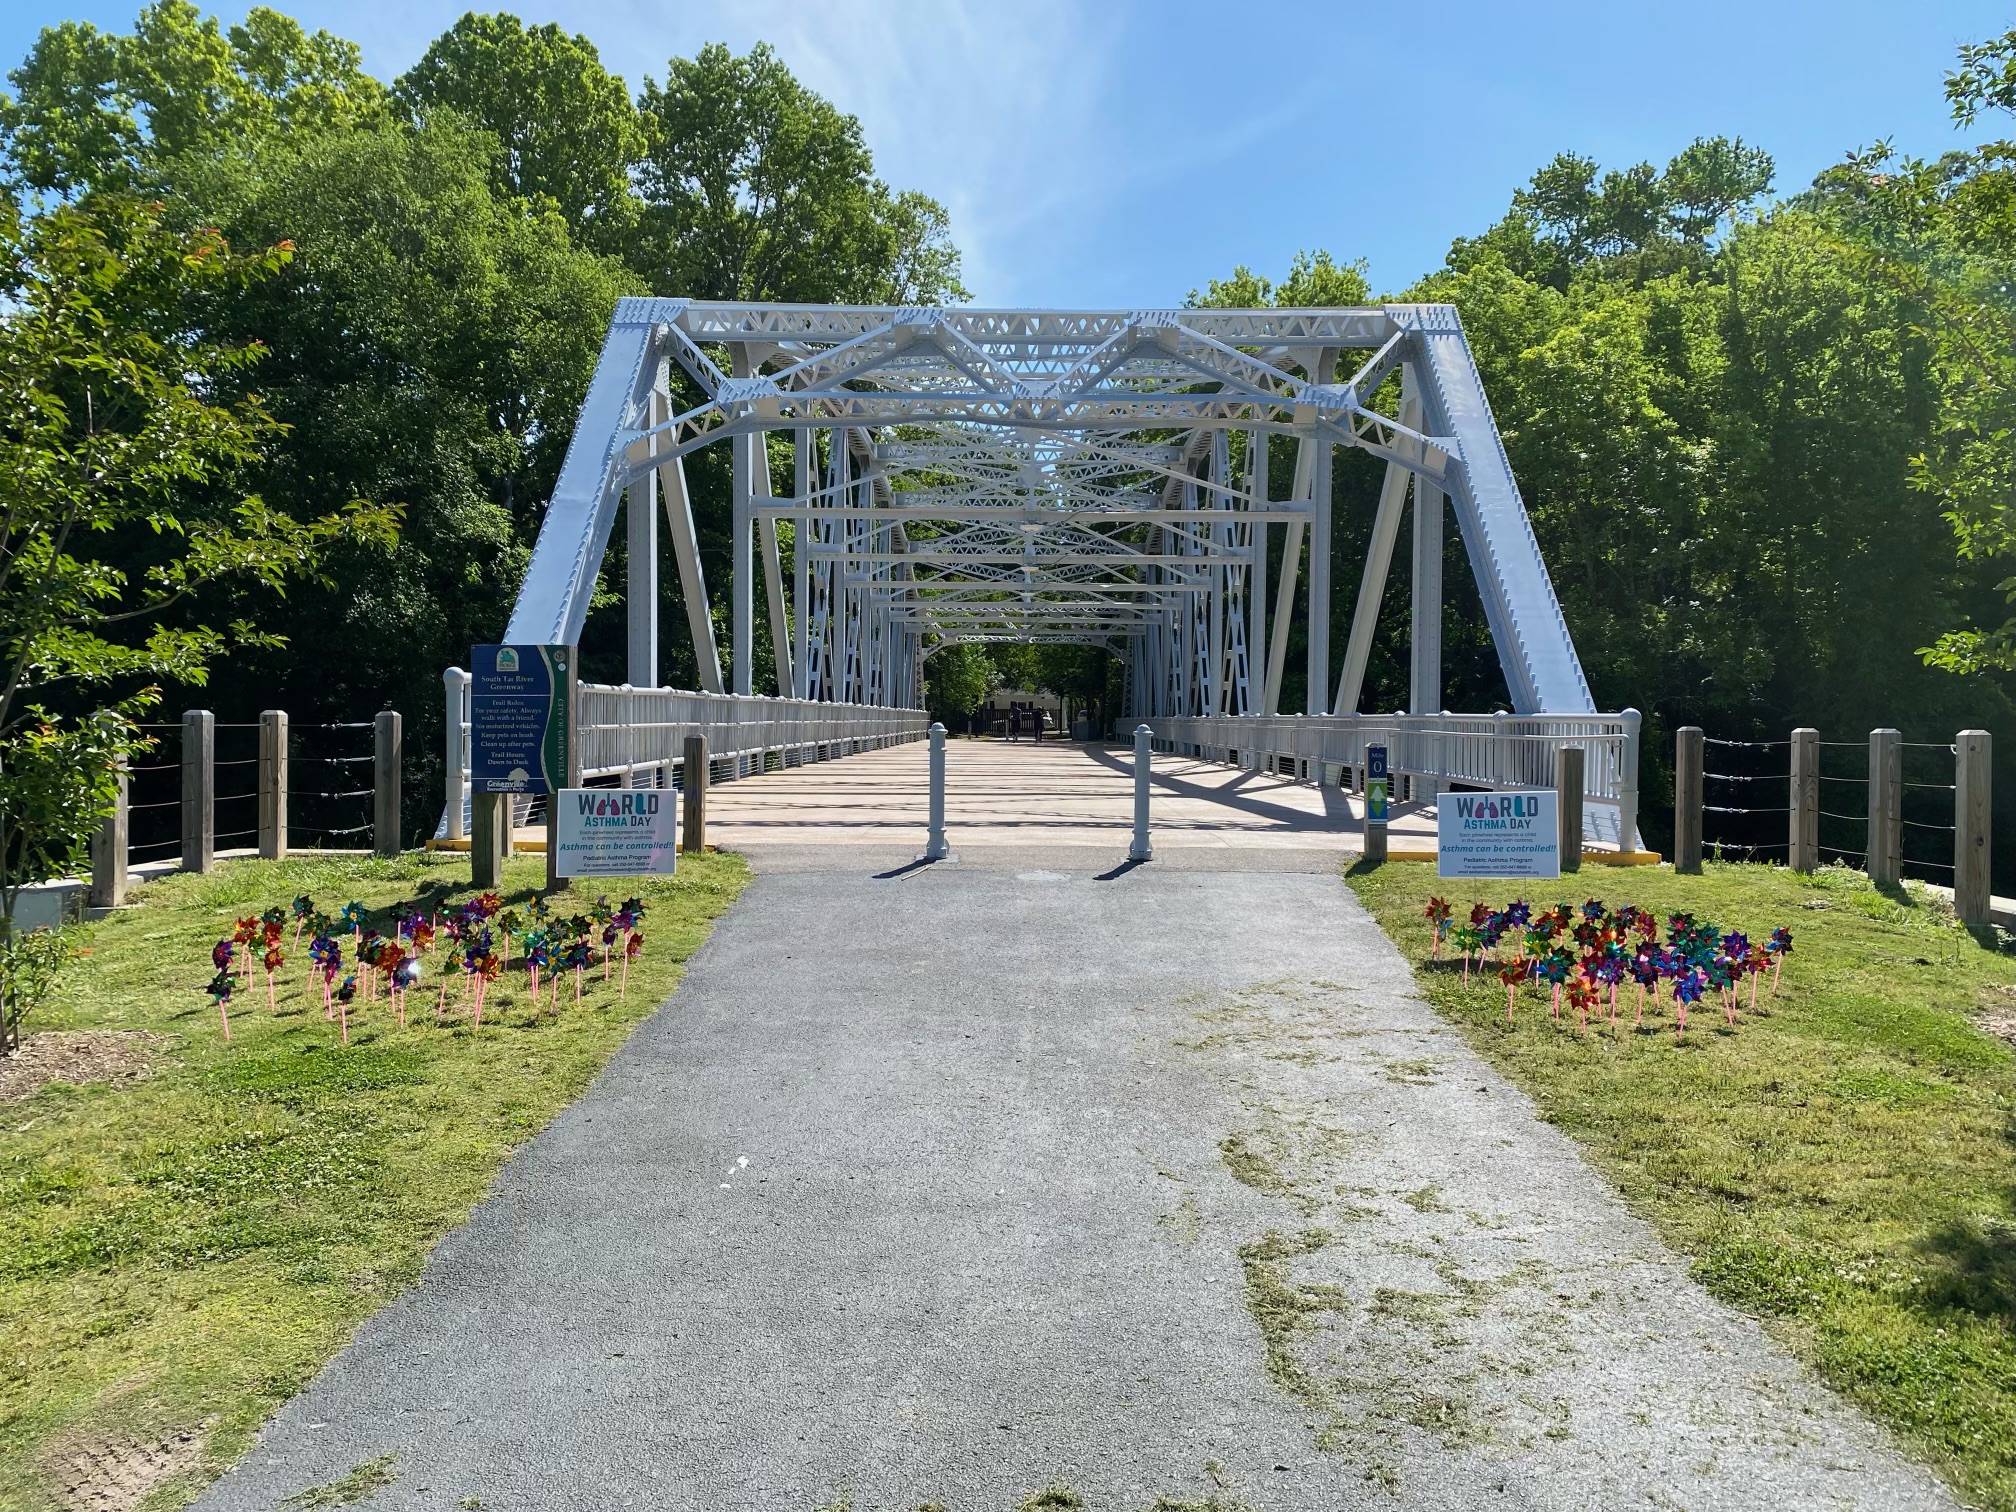 Grass leading to a walking bridge in Greenville is decorated with small pinwheels, each one recognizing a pediatric asthma patient seen at Maynard Children's Hospital.